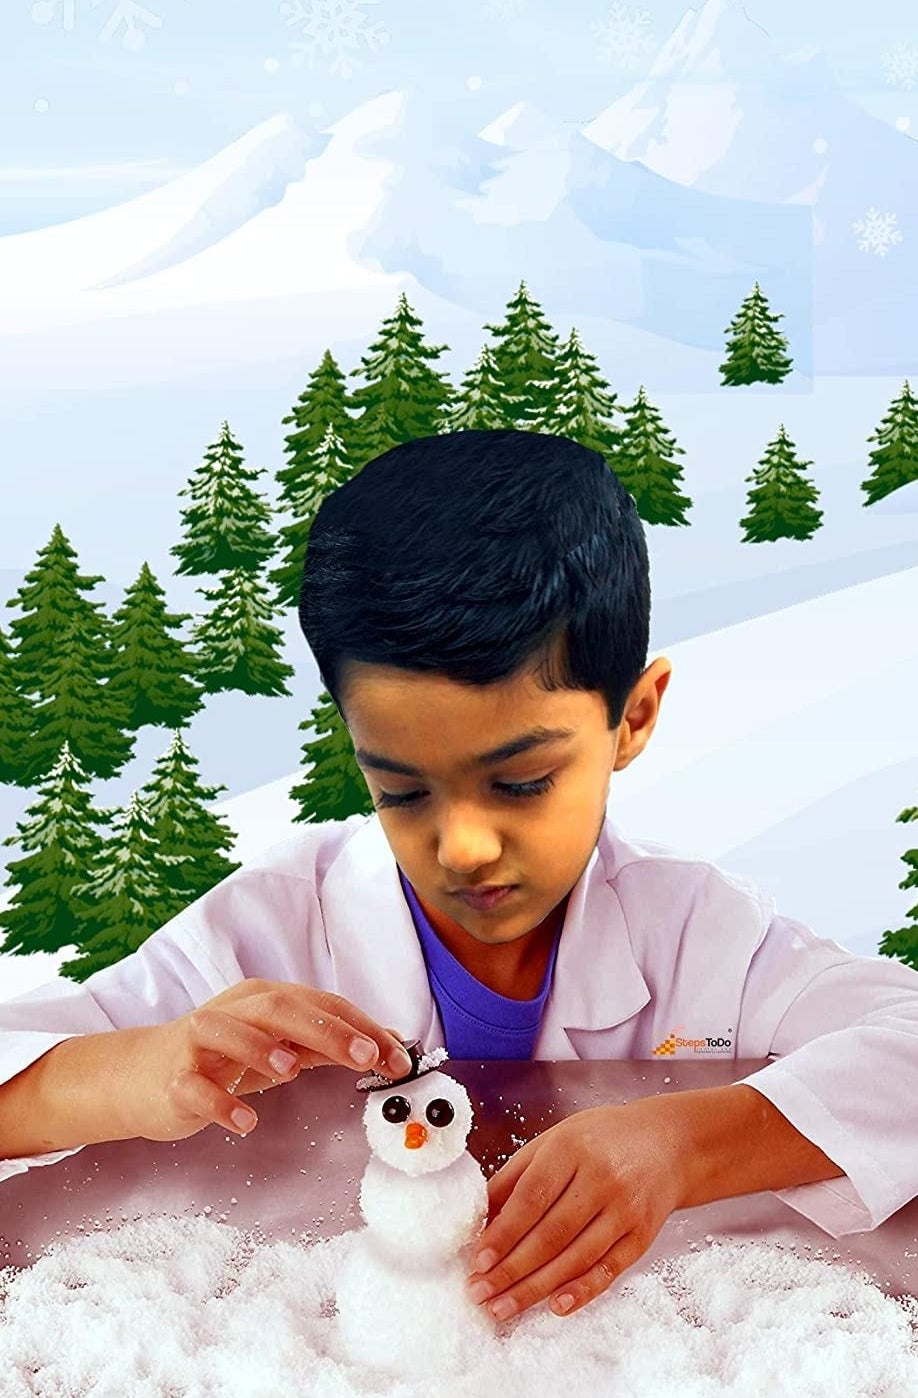 A child building a snowman out of fake snow.